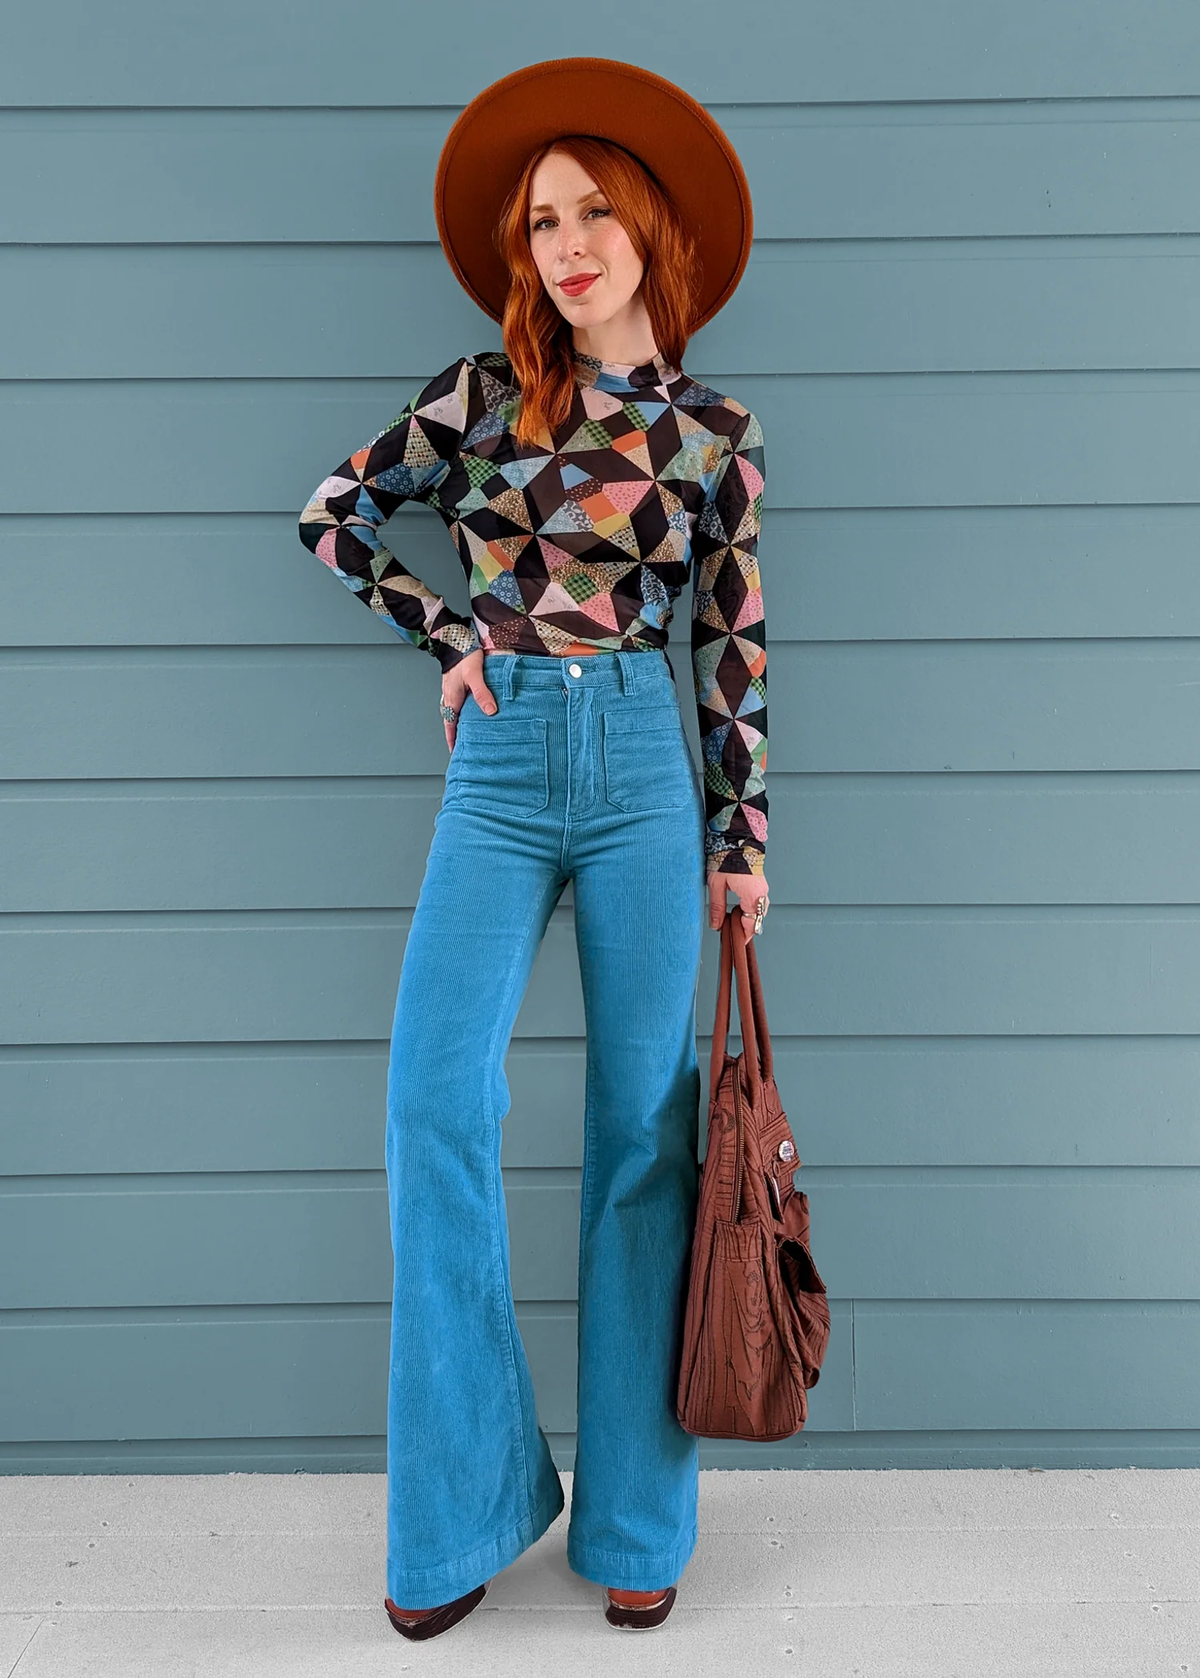 70s inspired cornflower light blue corduroy eastcoast flares with high rise waist and sailor patch front pockets, by Rolla's Jeans